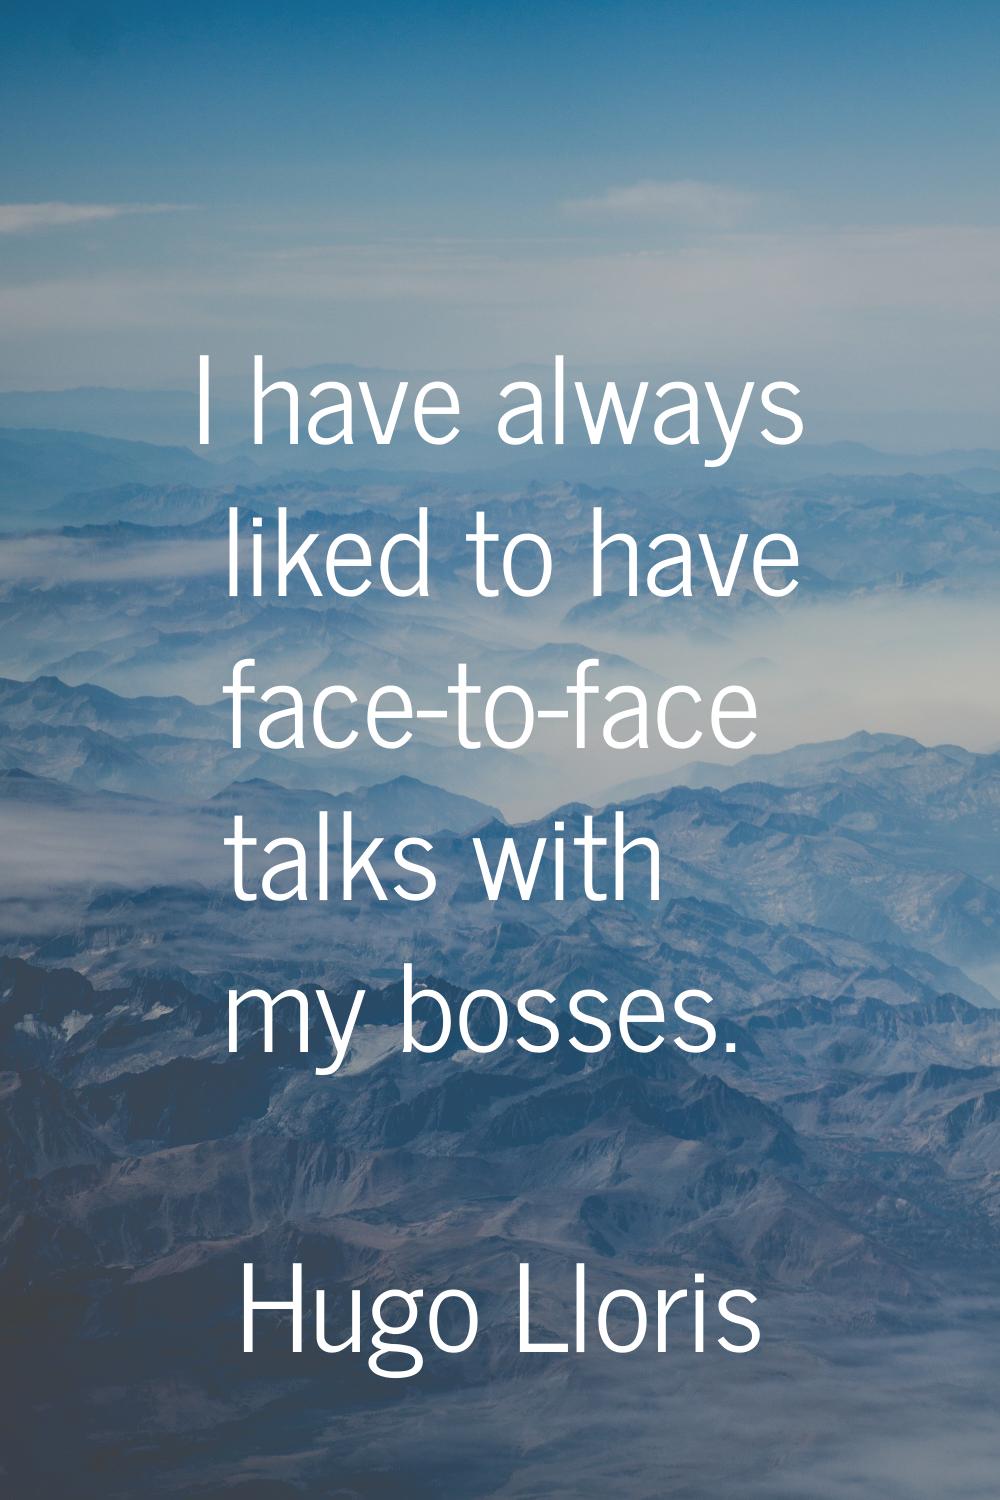 I have always liked to have face-to-face talks with my bosses.